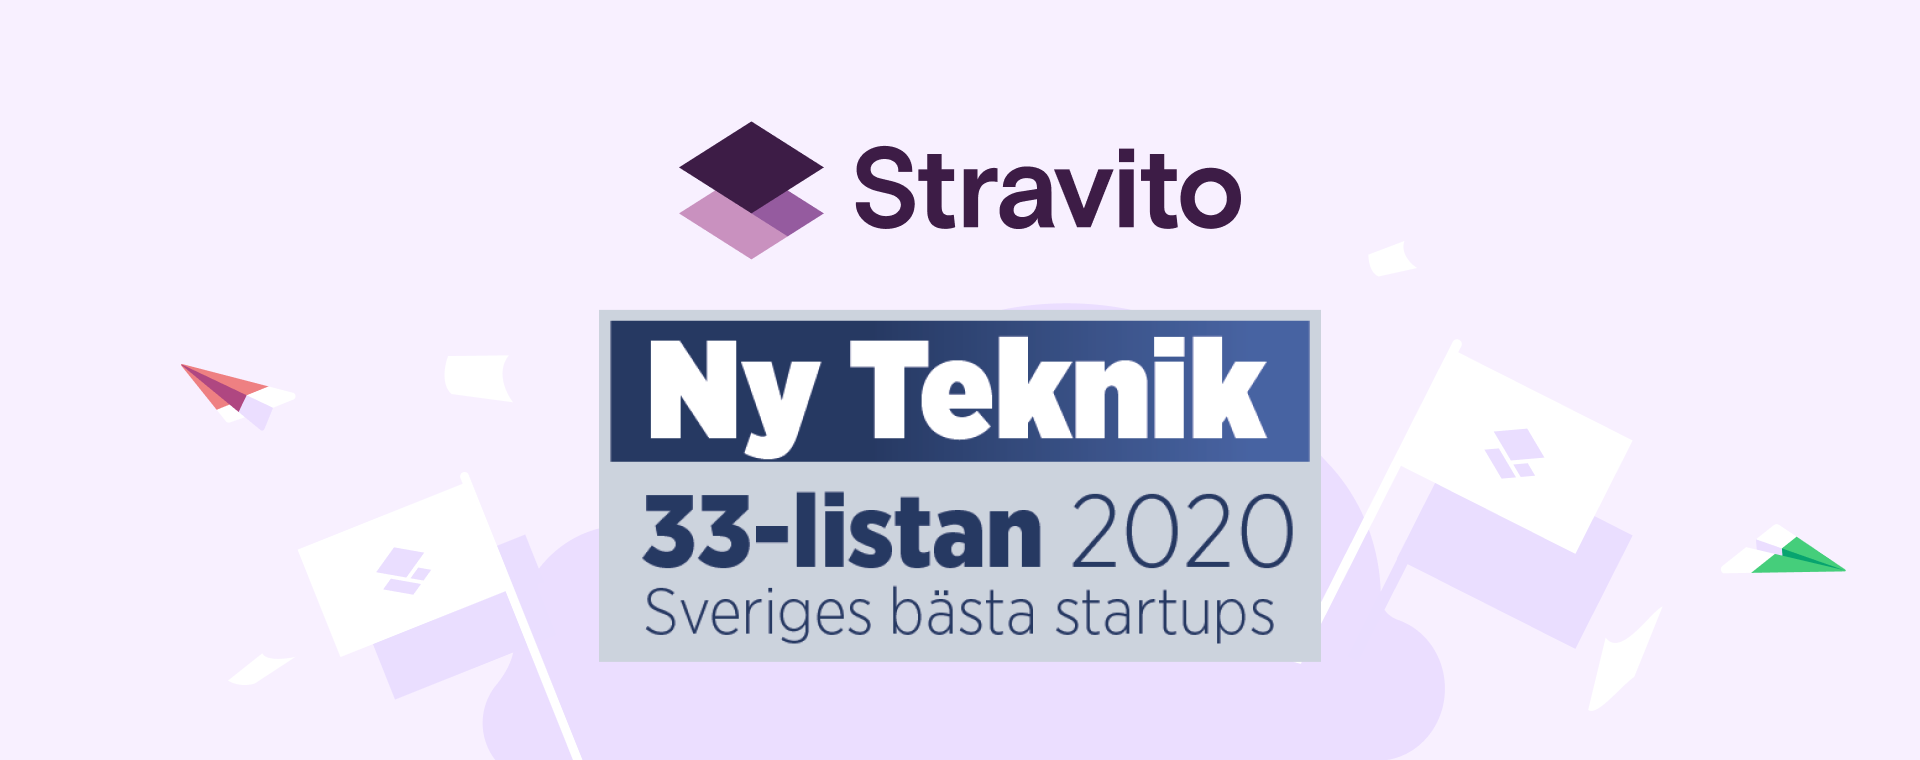 Stravito named a top startup in 2020 by 33-Listan and Ny Teknik